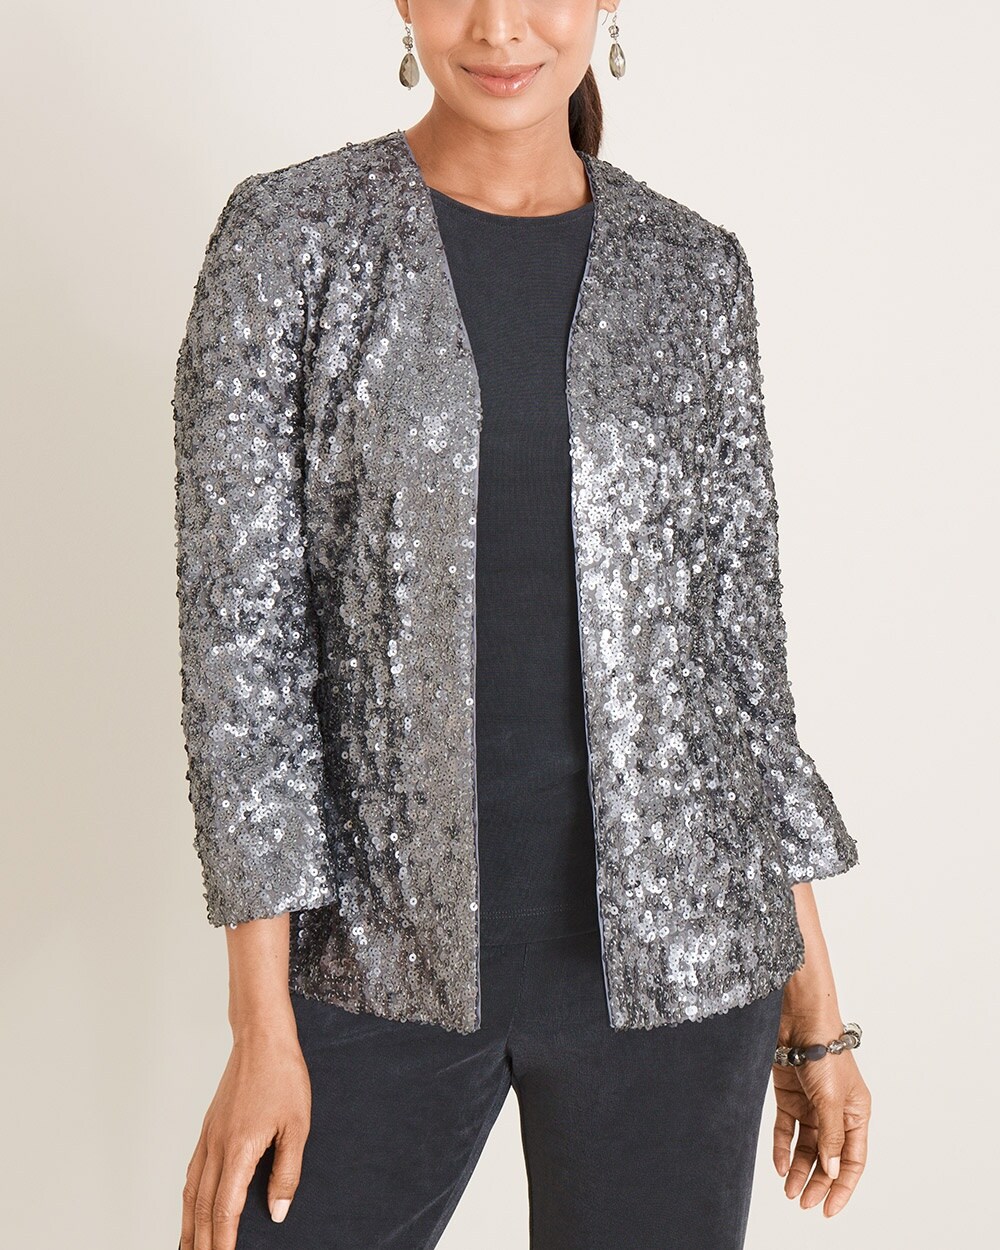 Travelers Collection Sequin Jacket - Chico's